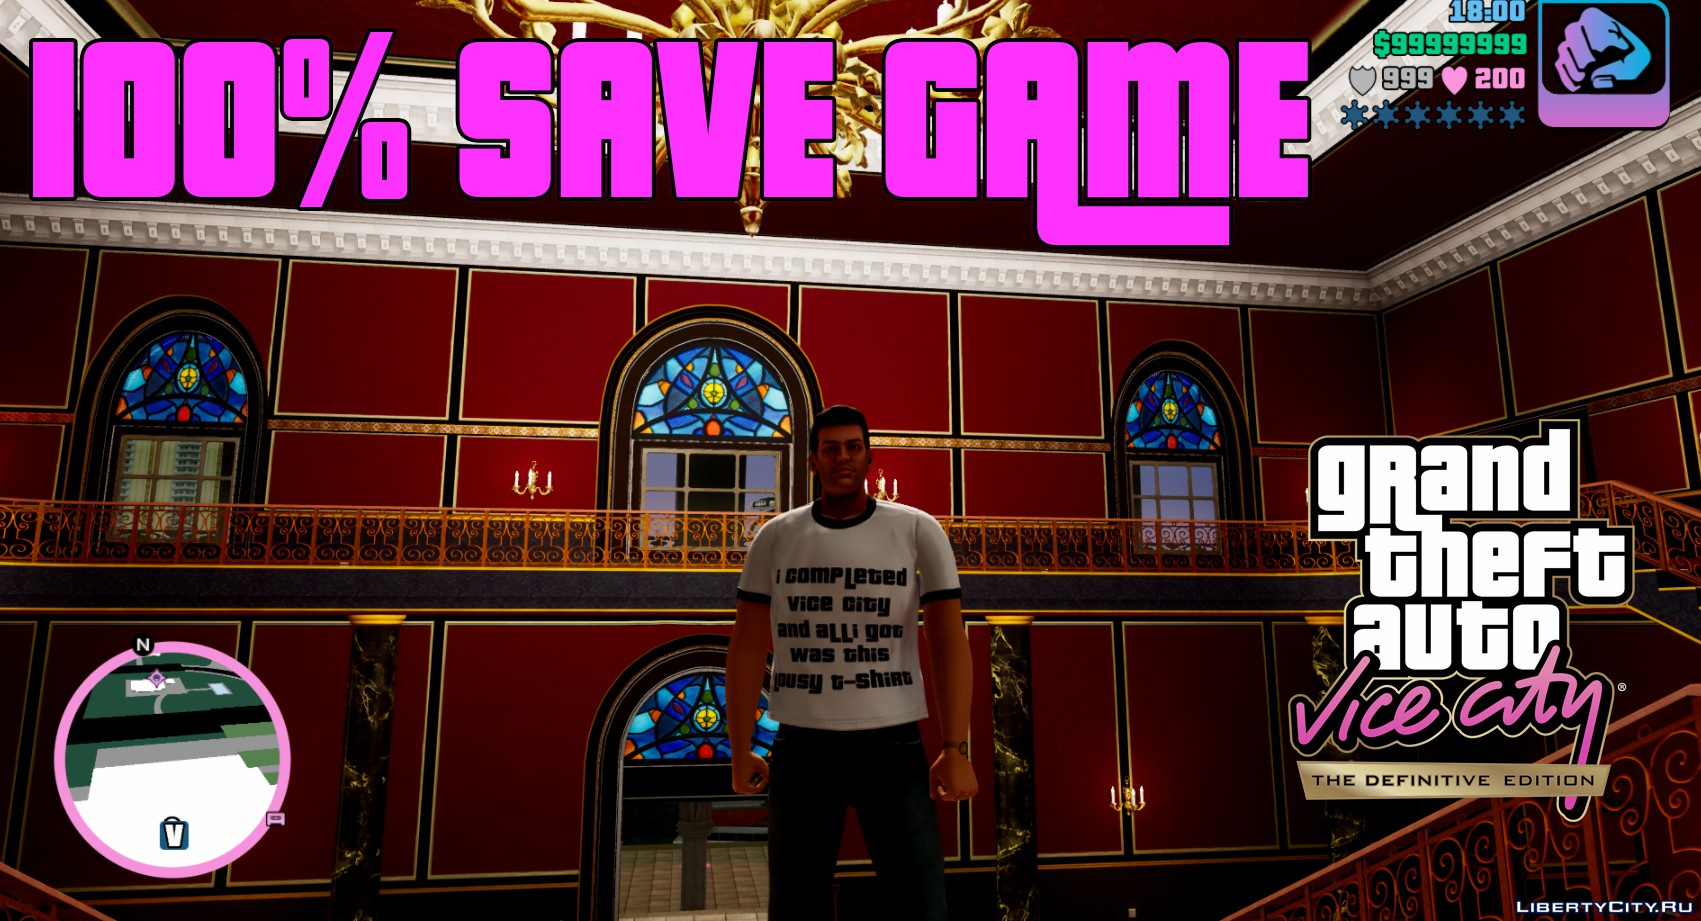 hovedsagelig Metafor Professor Download 100% Save "Game completed 100%" for GTA Vice City: The Definitive  Edition